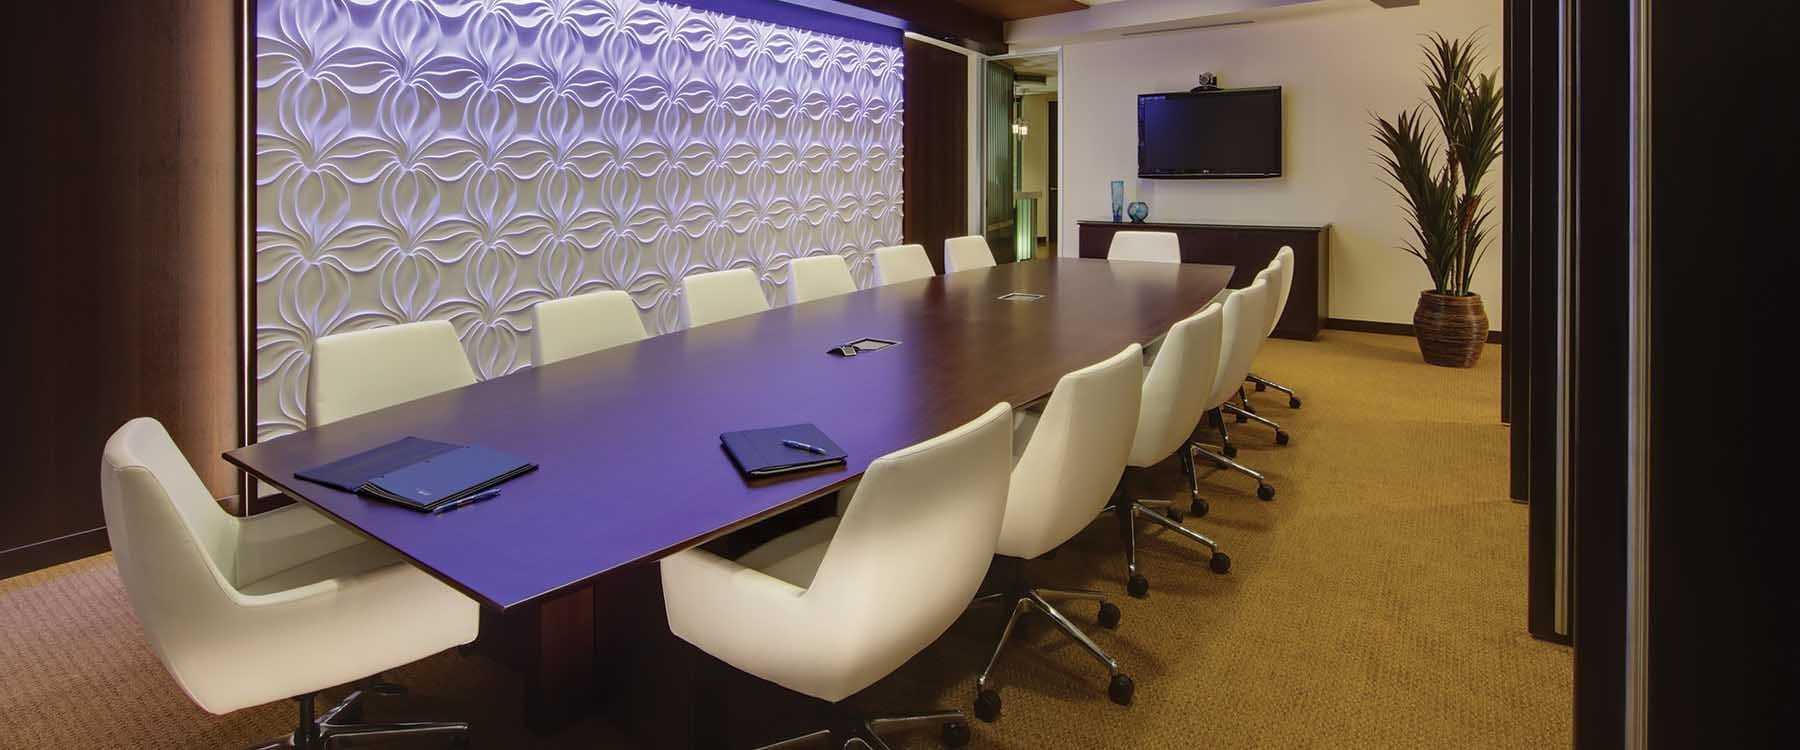 Johnson Bank Conference Room